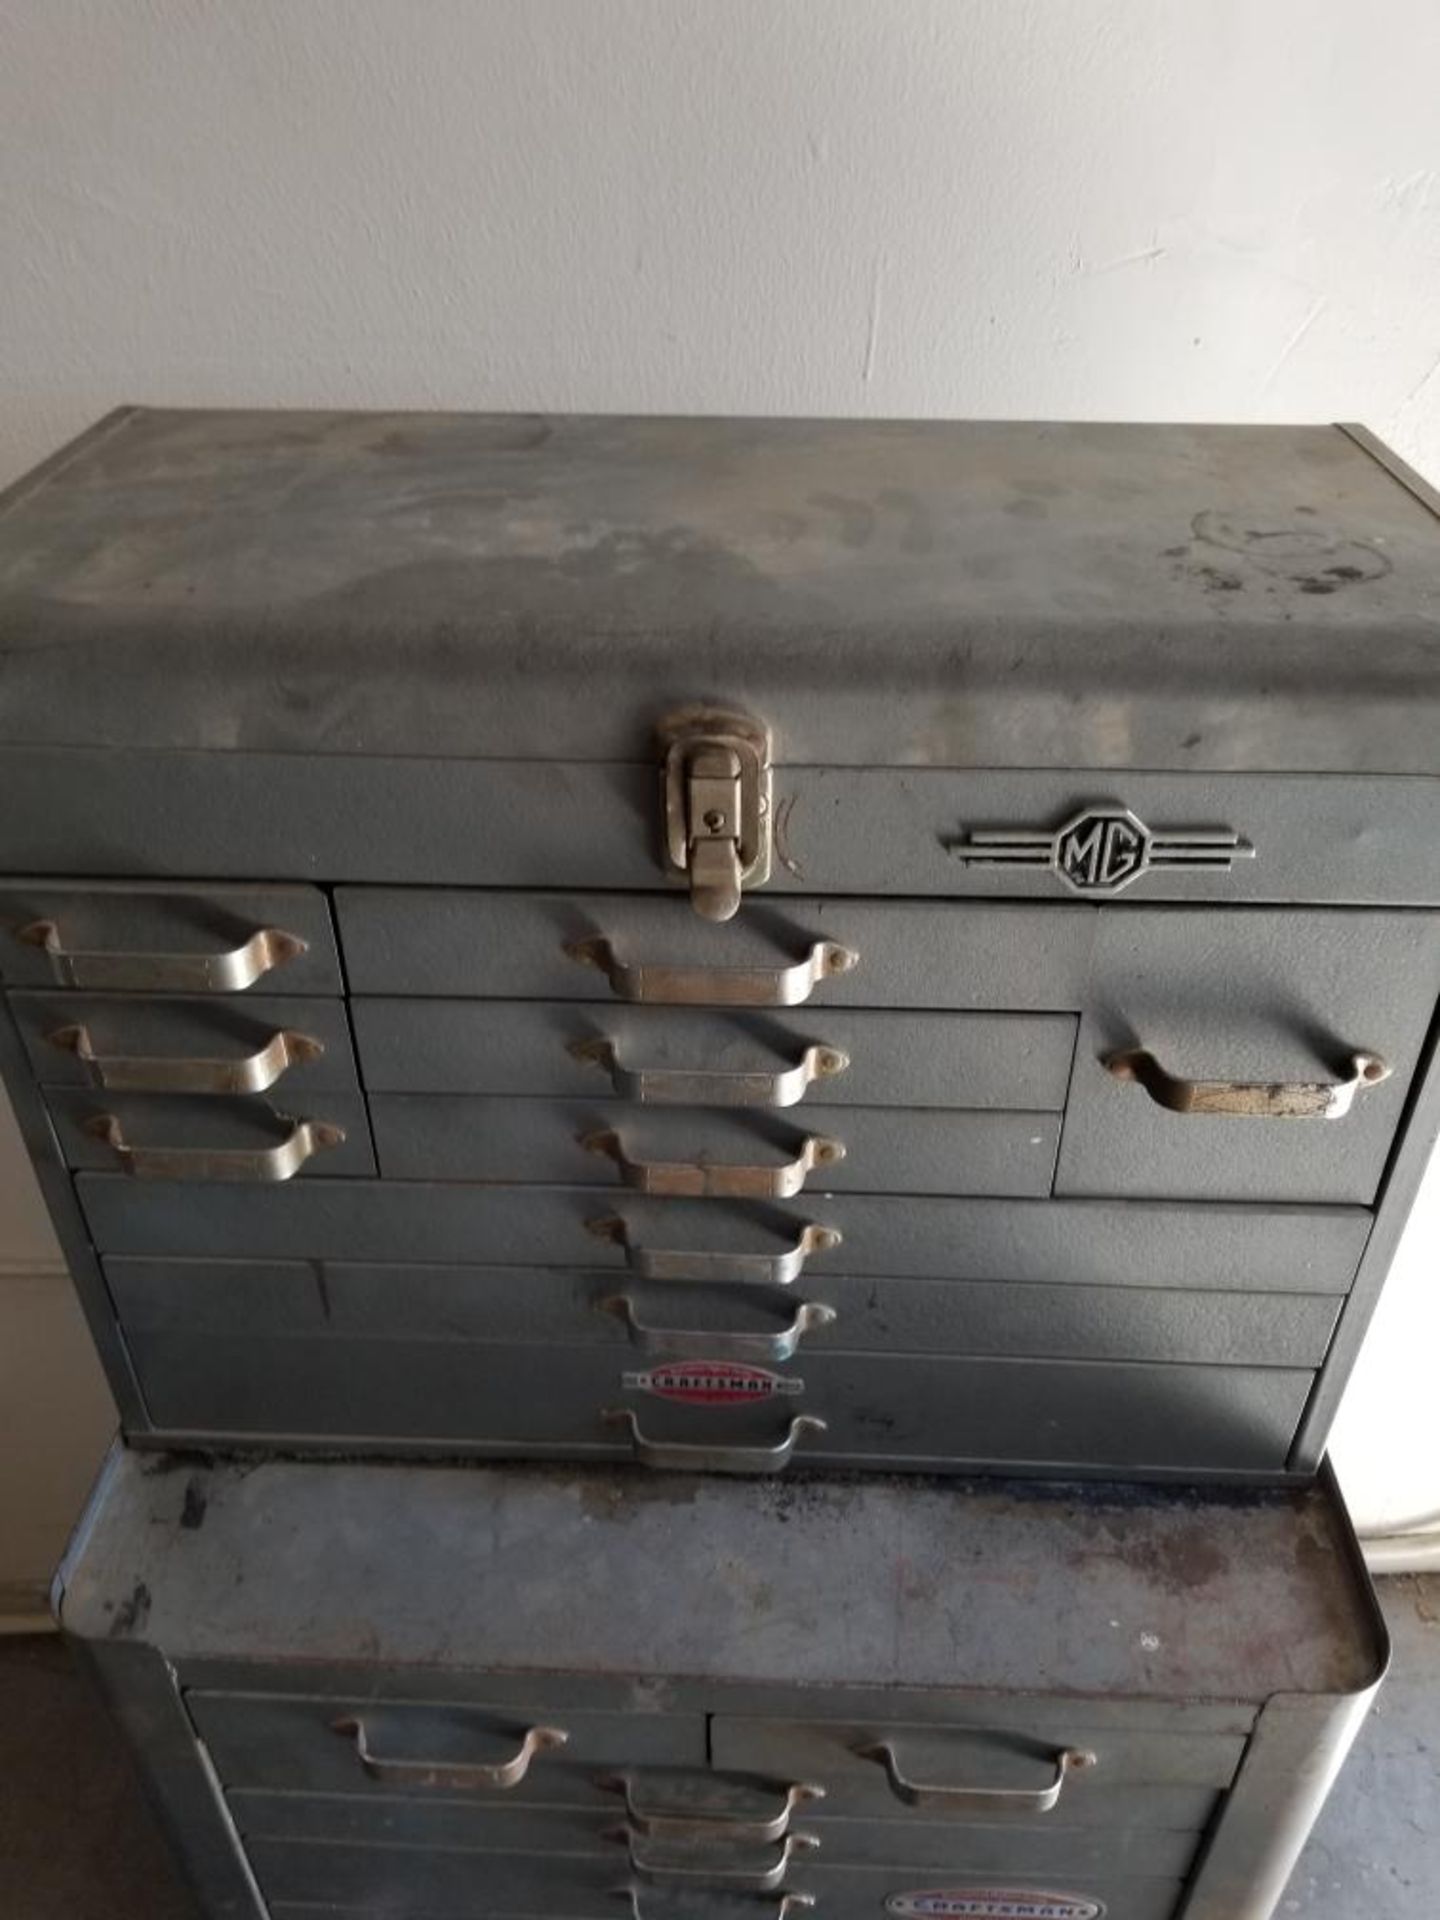 Vintage Craftsman Metal Tool Chest Cabinet Box, 19 drawer, 4 feet tall *Los Angeles Area Pick Up - Image 8 of 8